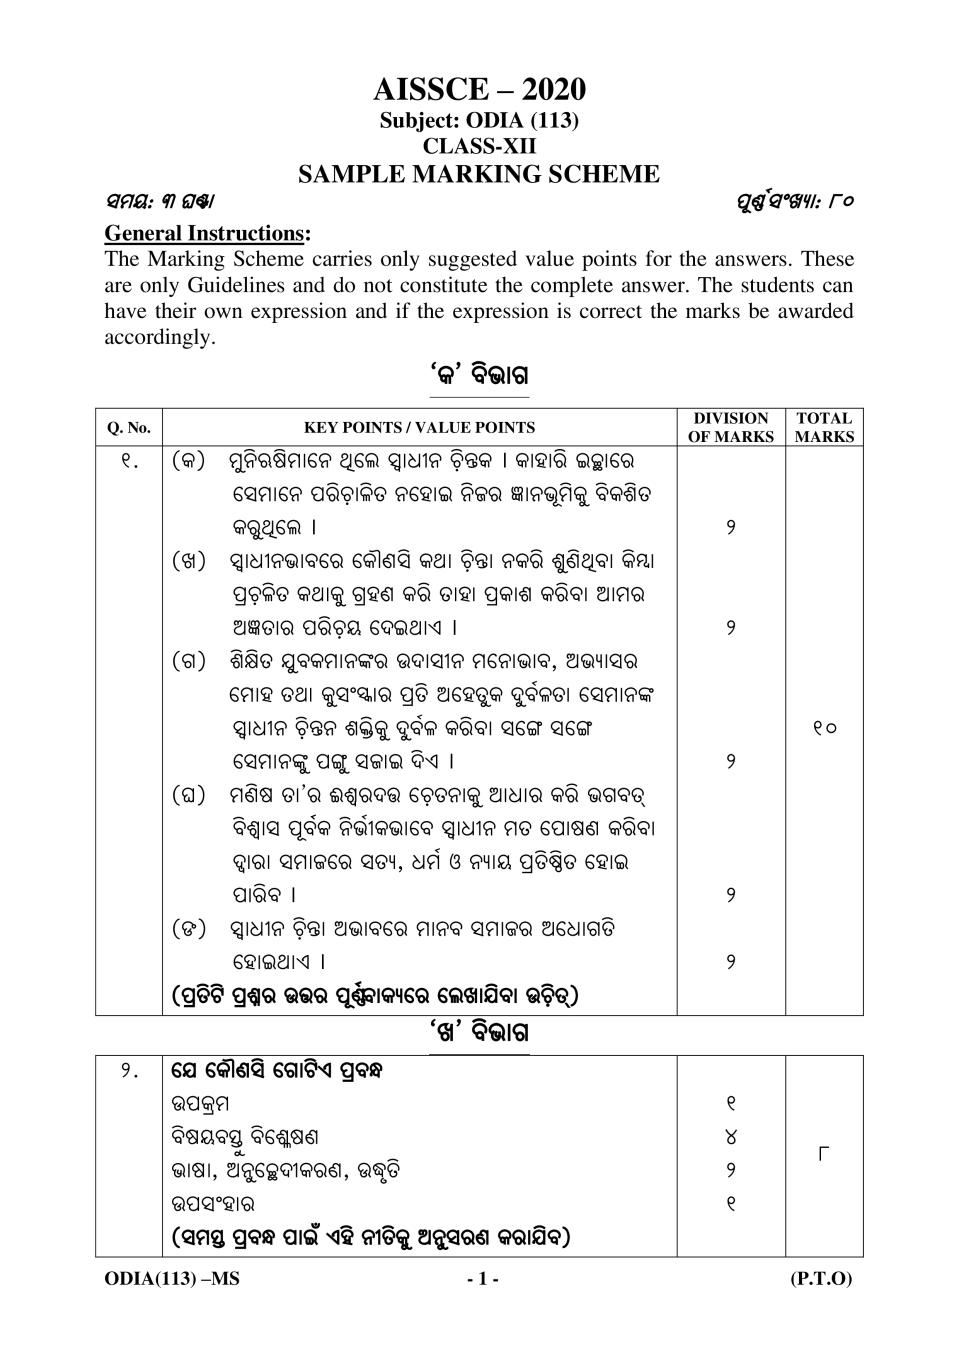 CBSE Class 12 Marking Scheme 2020 for Odia - Page 1